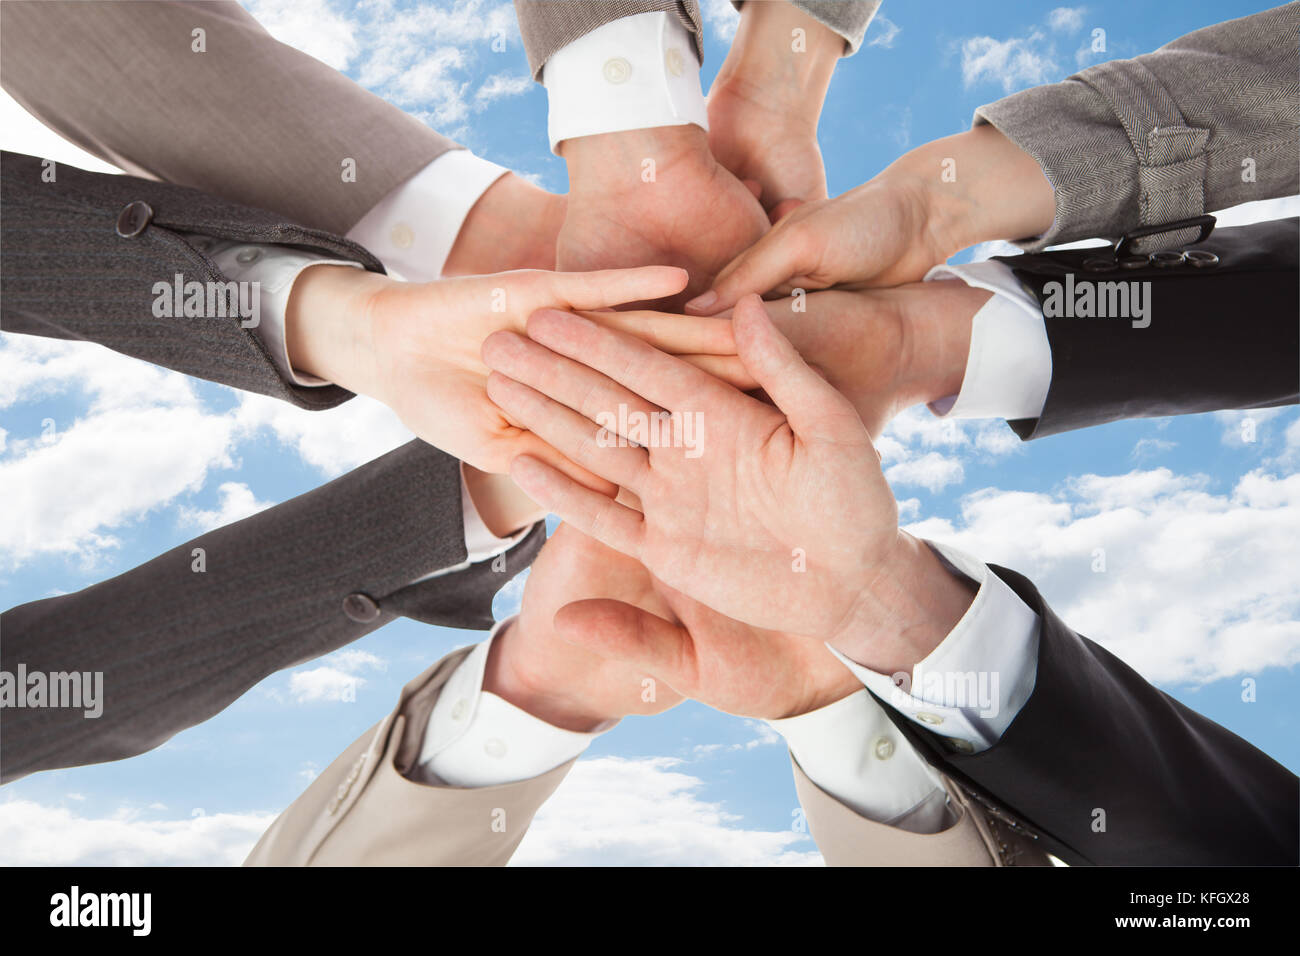 Closeup of business people's hands on top of each other symbolizing unity against sky Stock Photo